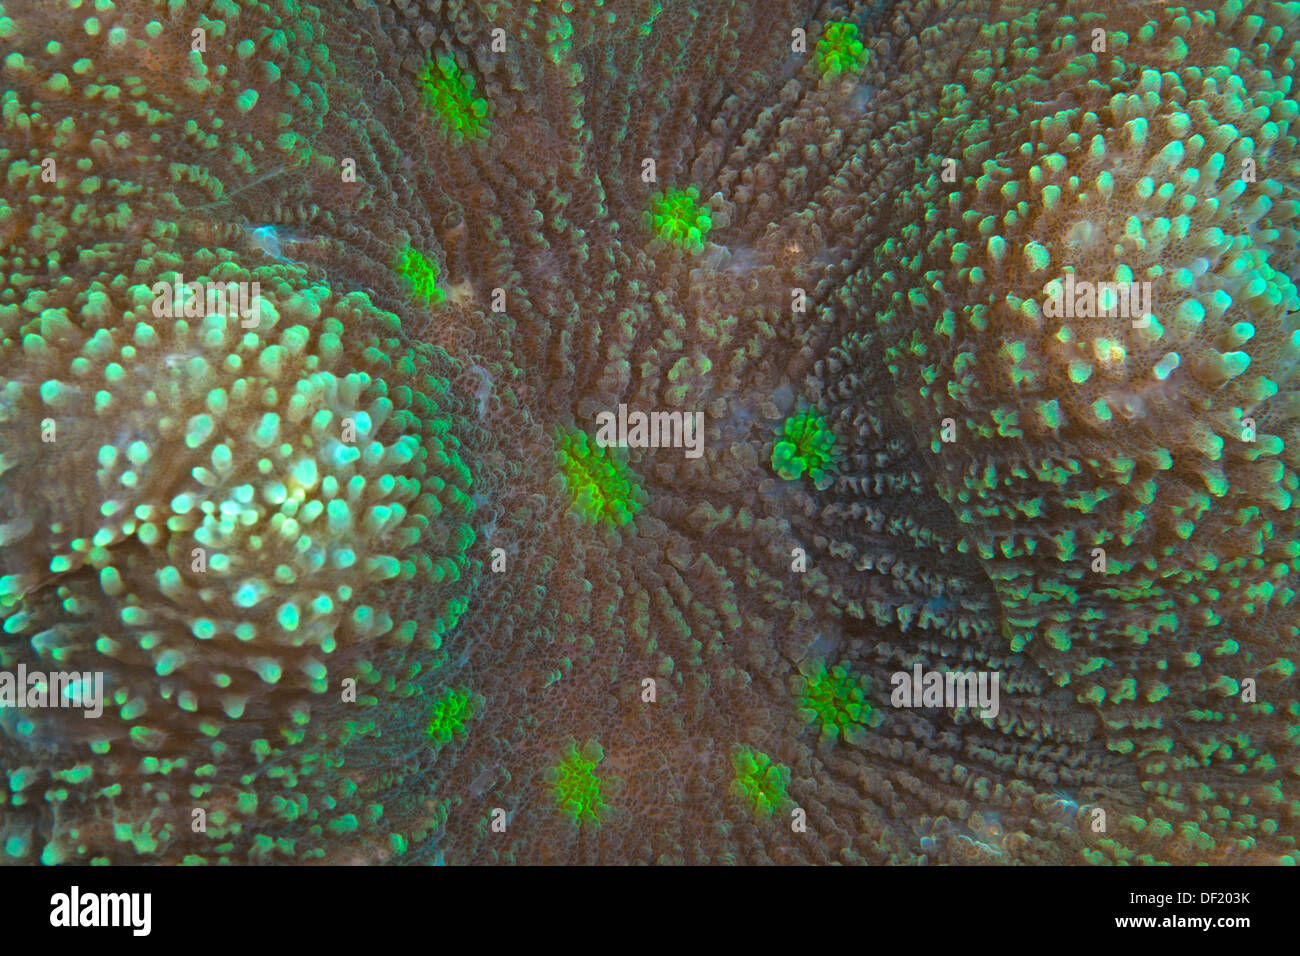 Detail image of fluorescent knob coral, Favia sp. Stock Photo